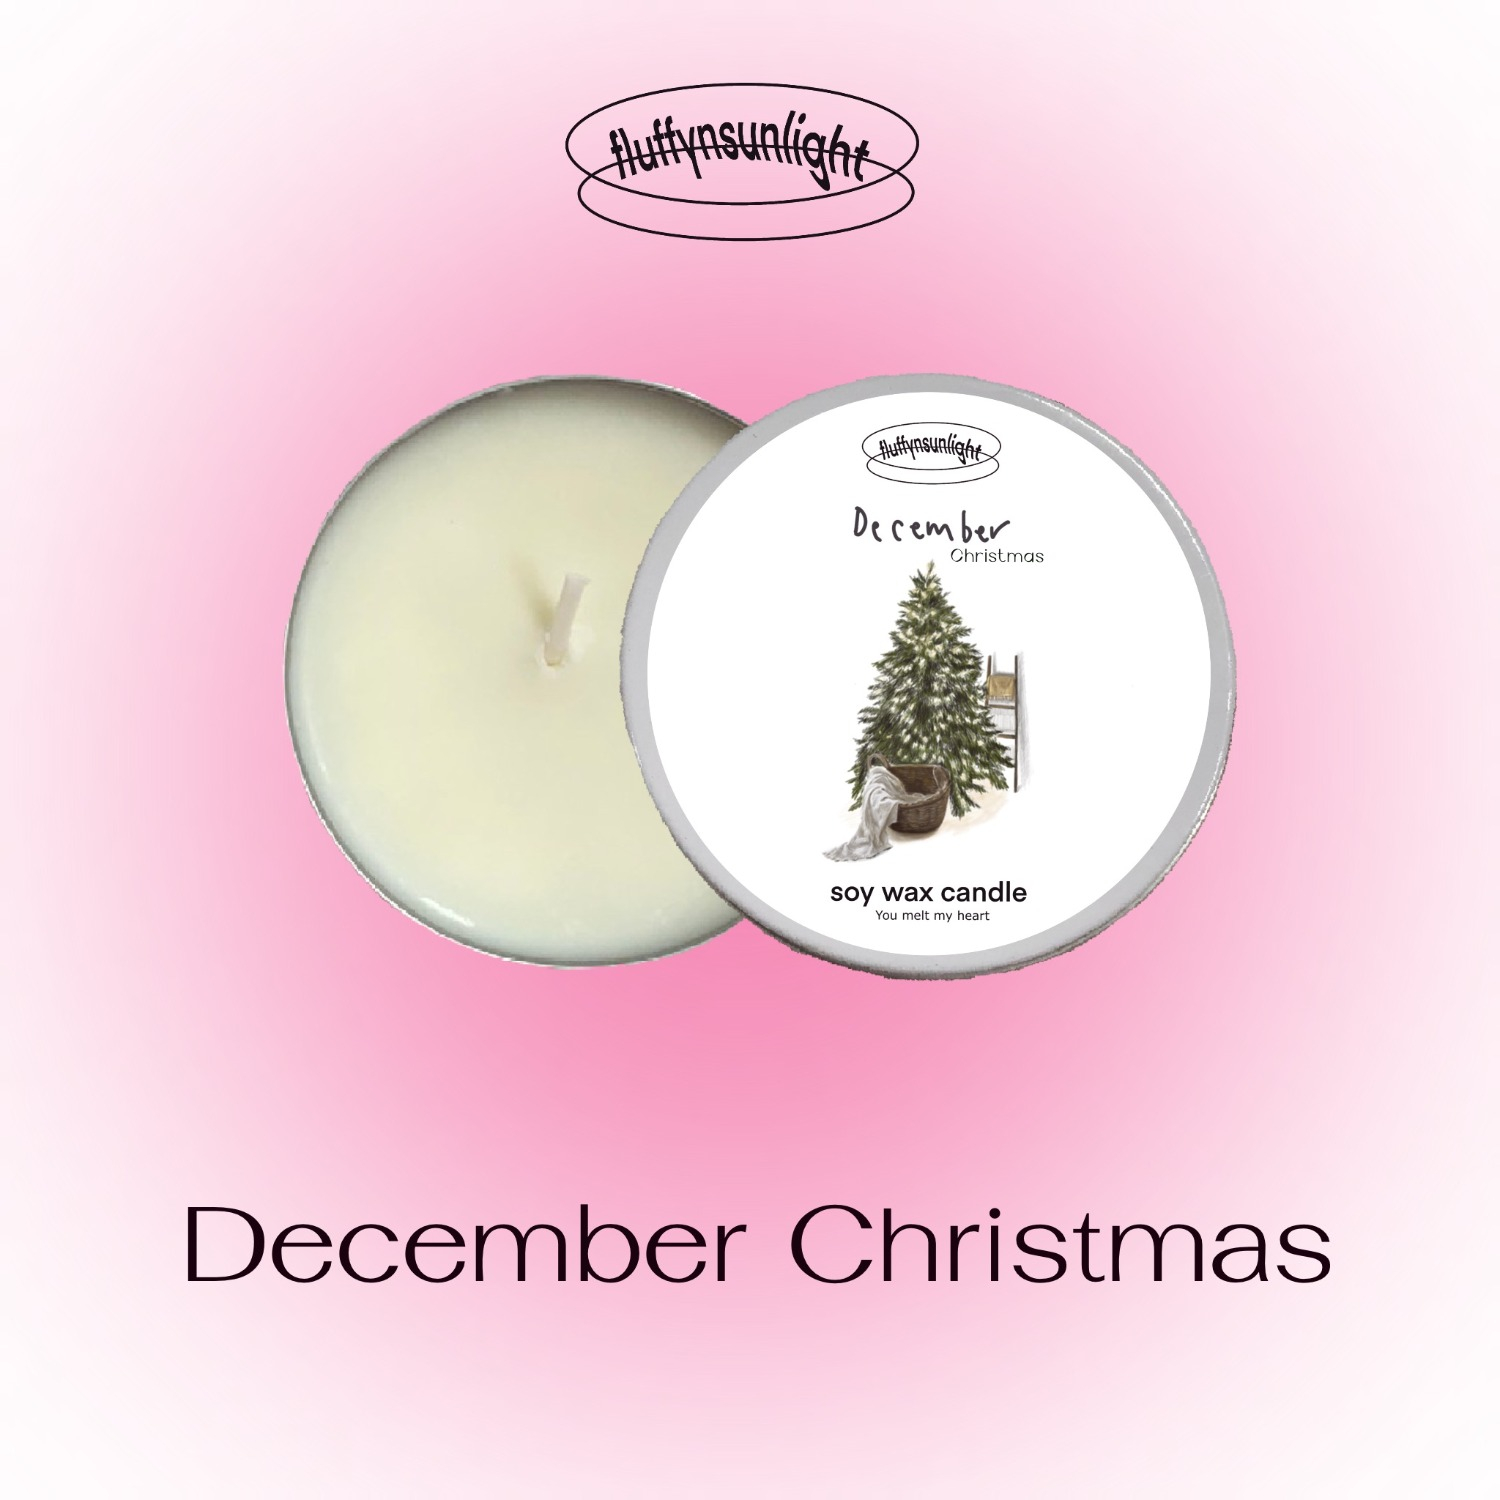 Soy Wax Candles (December Christmas)